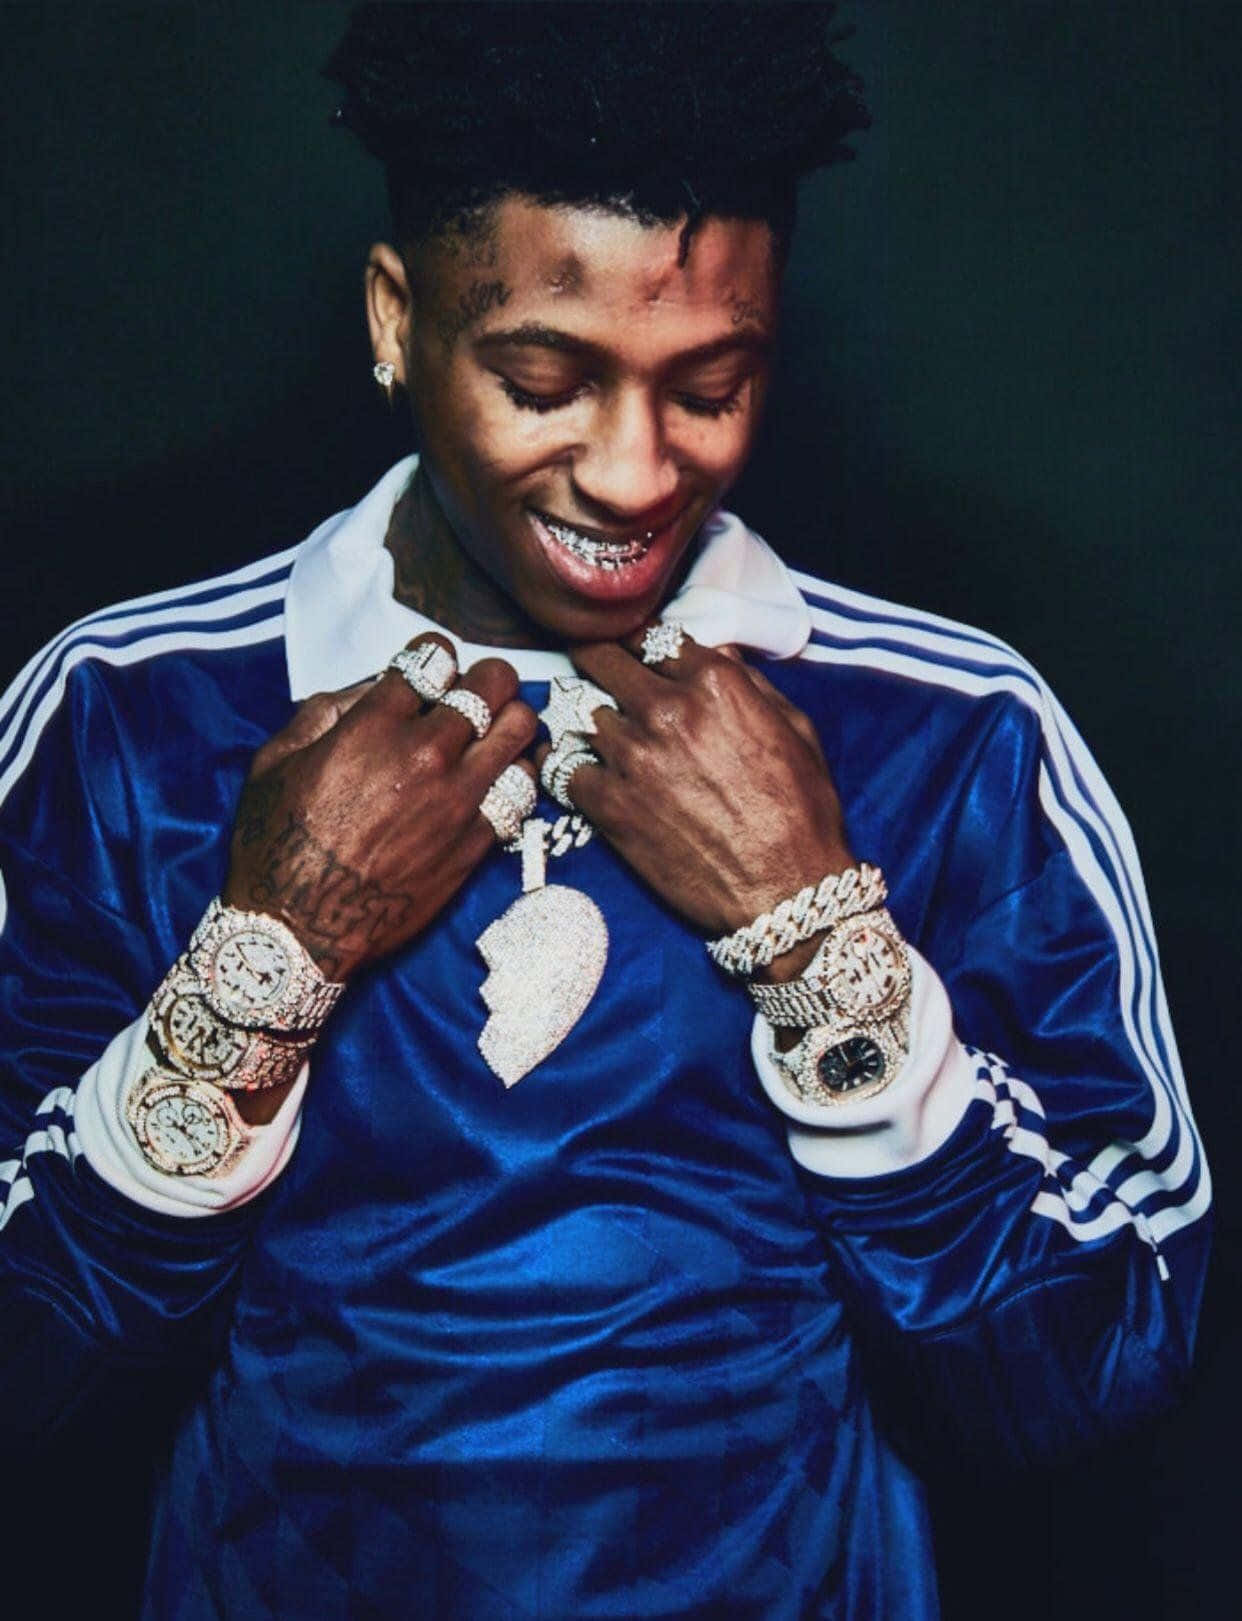 YoungBoy Never Broke Again serving up bars and looks.